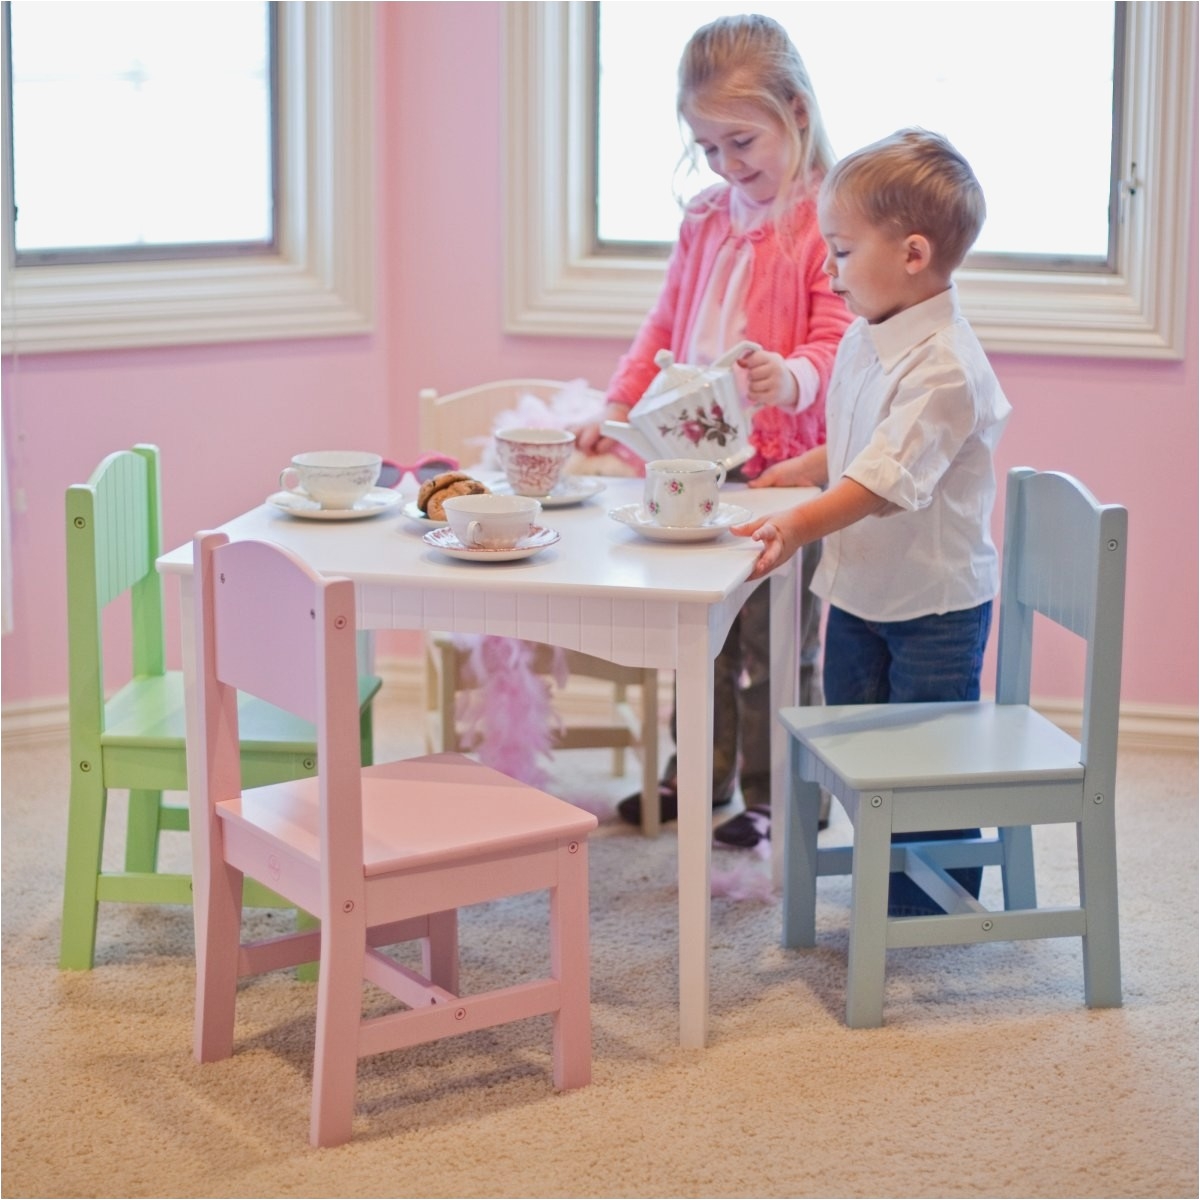 Childrens Fisher Price Table and Chairs Wooden Child Chair Style Cheap Childrens Table and Chair Set